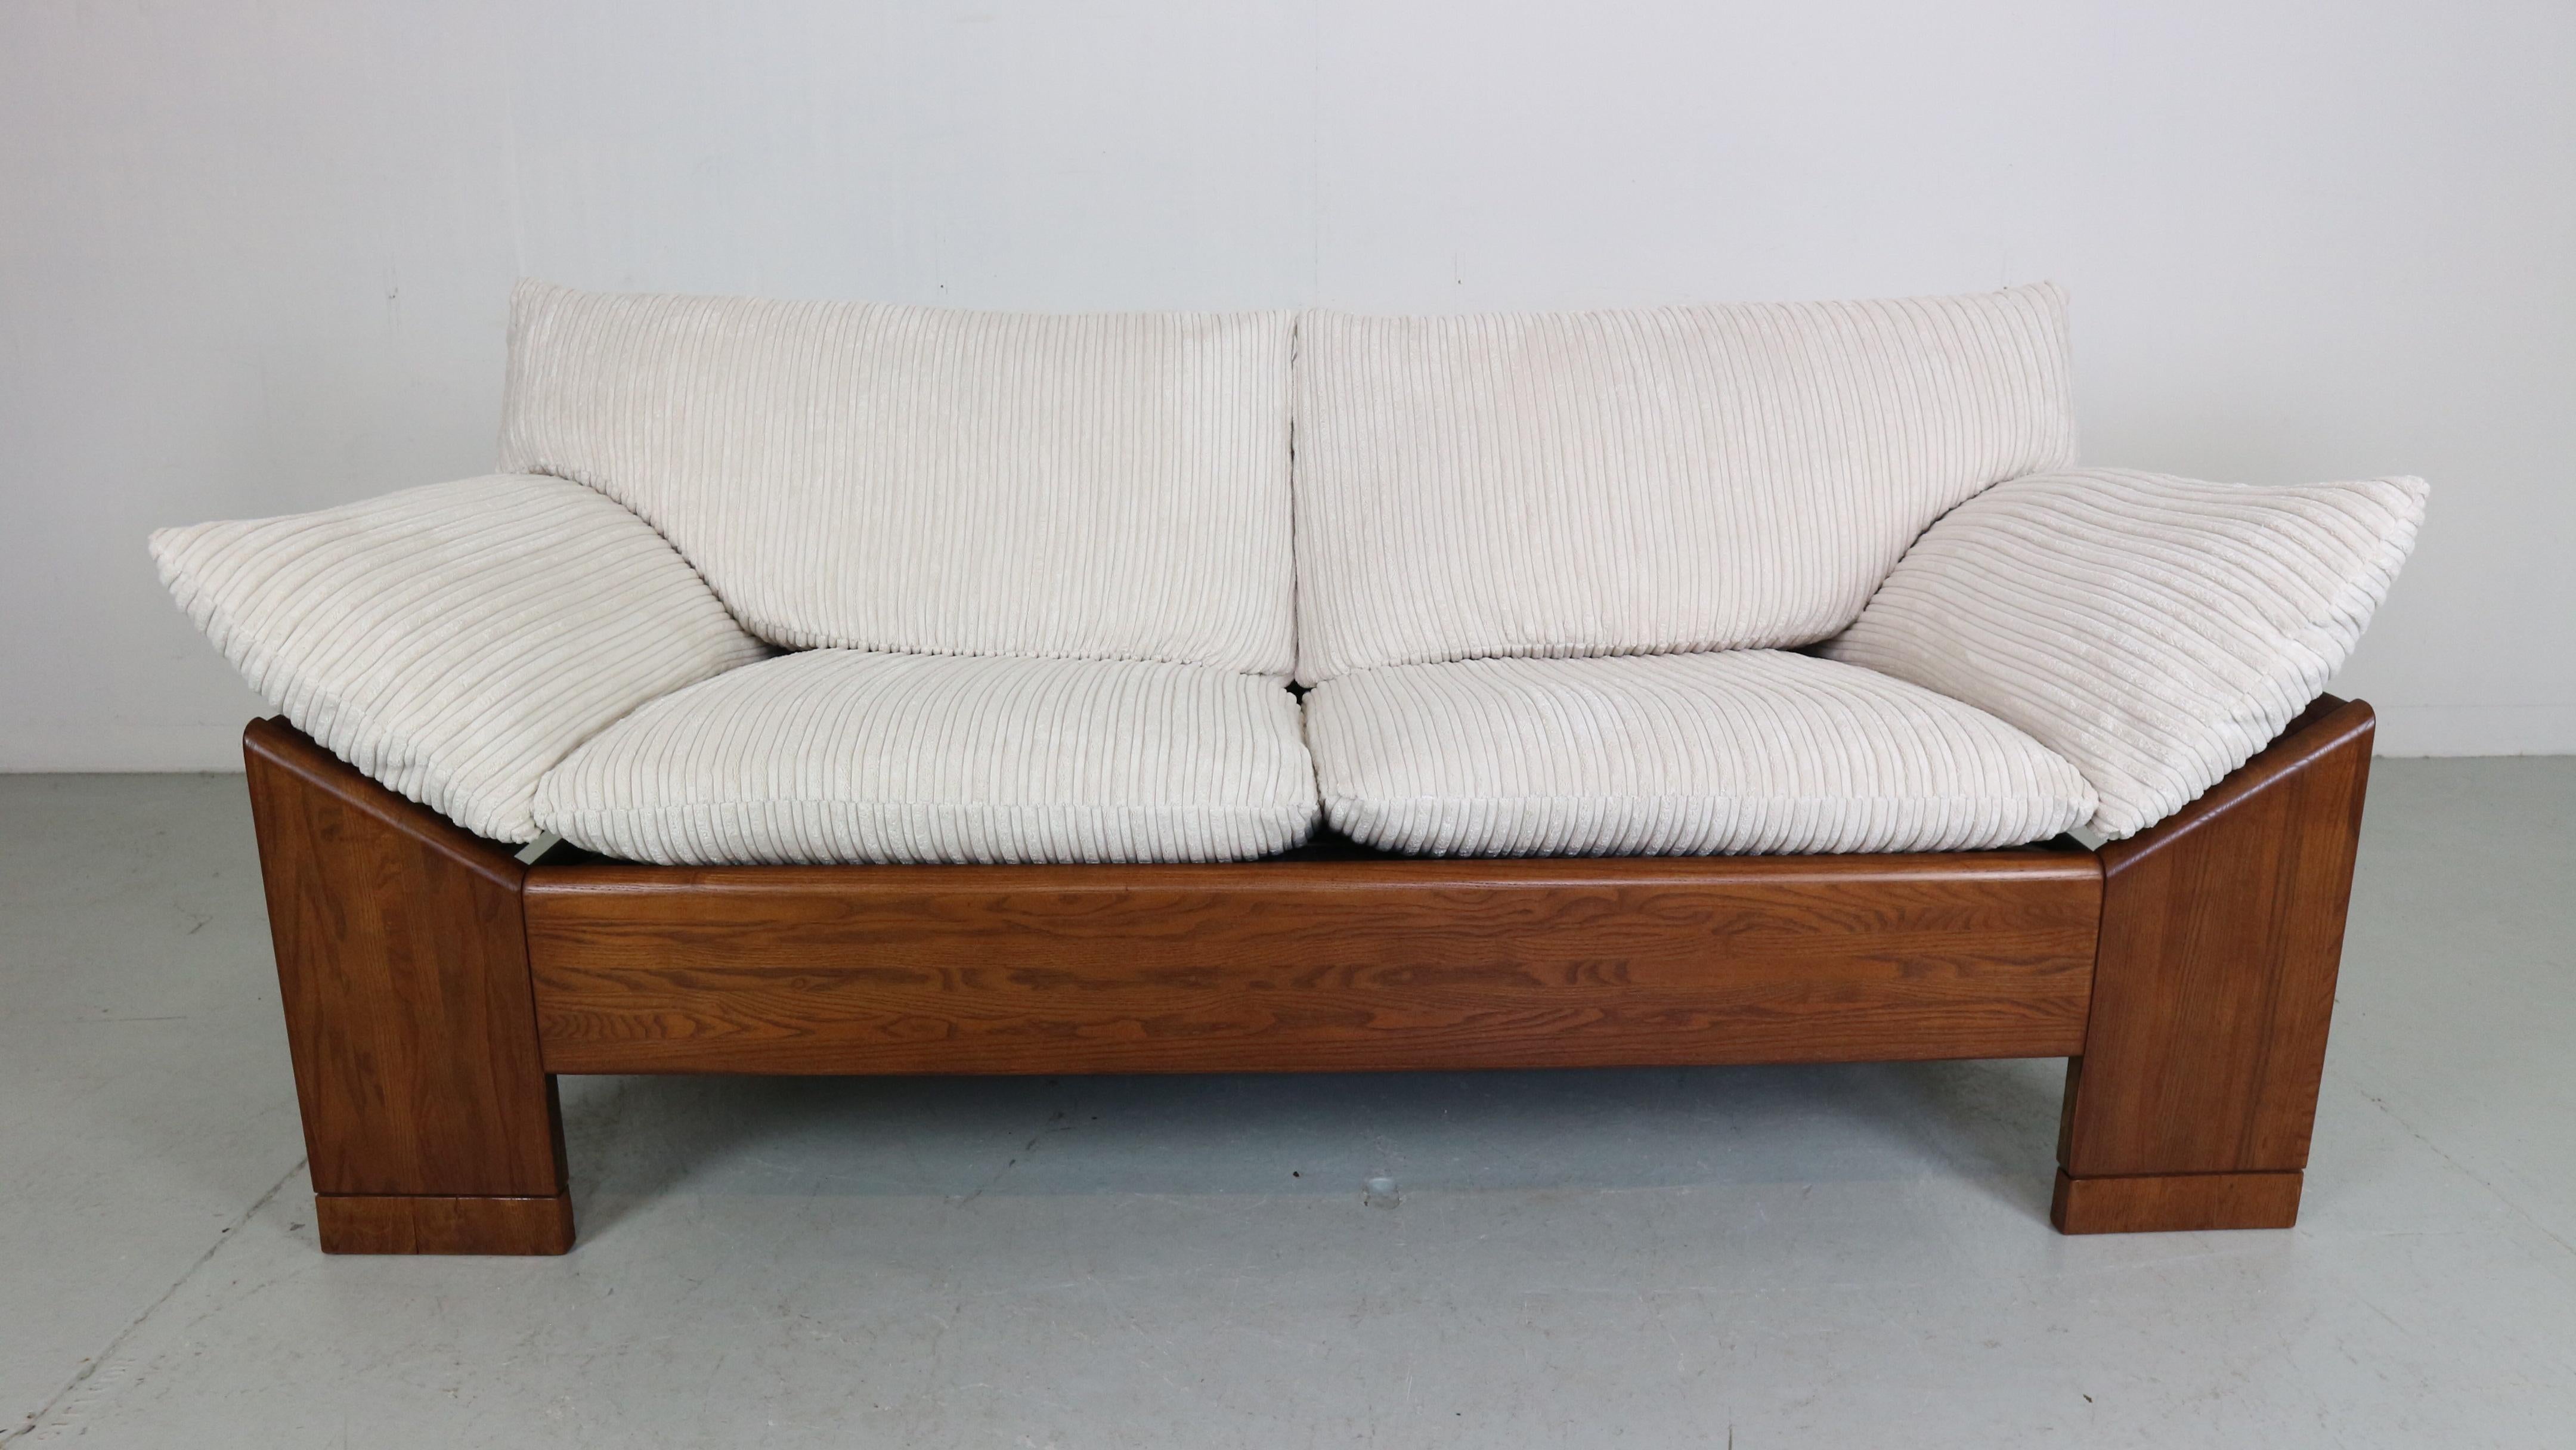 Mid-Century Modern period 2 seater sofa or loveseat made of Dutch furniture manufacture Leolux in 1960s period.

High quality sofa has a solid wenge wood frame and newly reupholstered cushions in off white striped velvet fabric.
Very comfortable